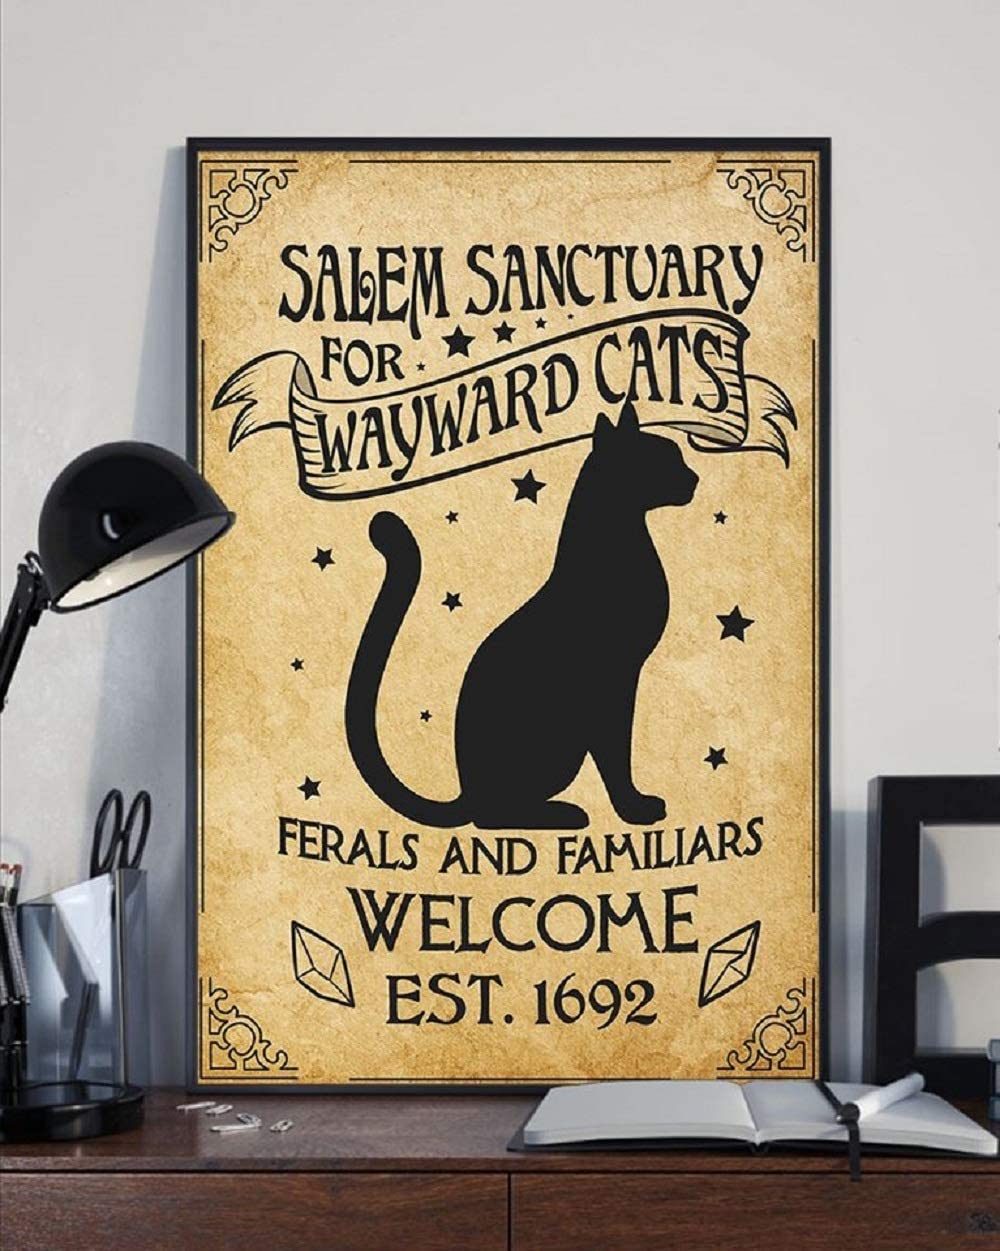 Salem Sanctuary For Wayward Cats Ferals And Familiars Welcome Est. 1692 1208